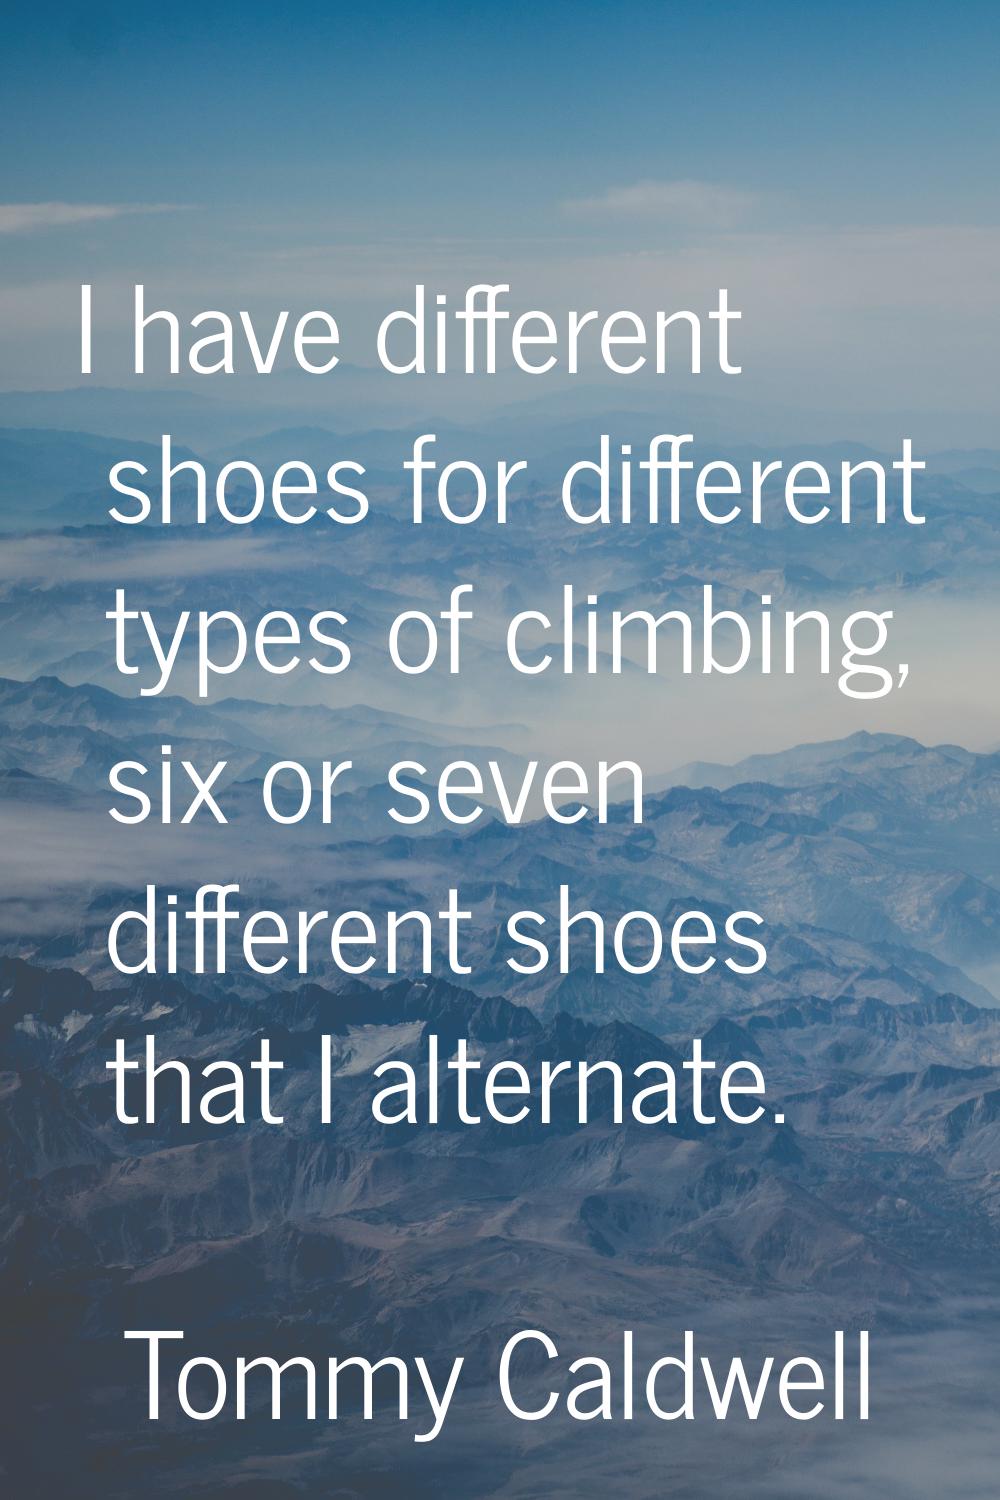 I have different shoes for different types of climbing, six or seven different shoes that I alterna